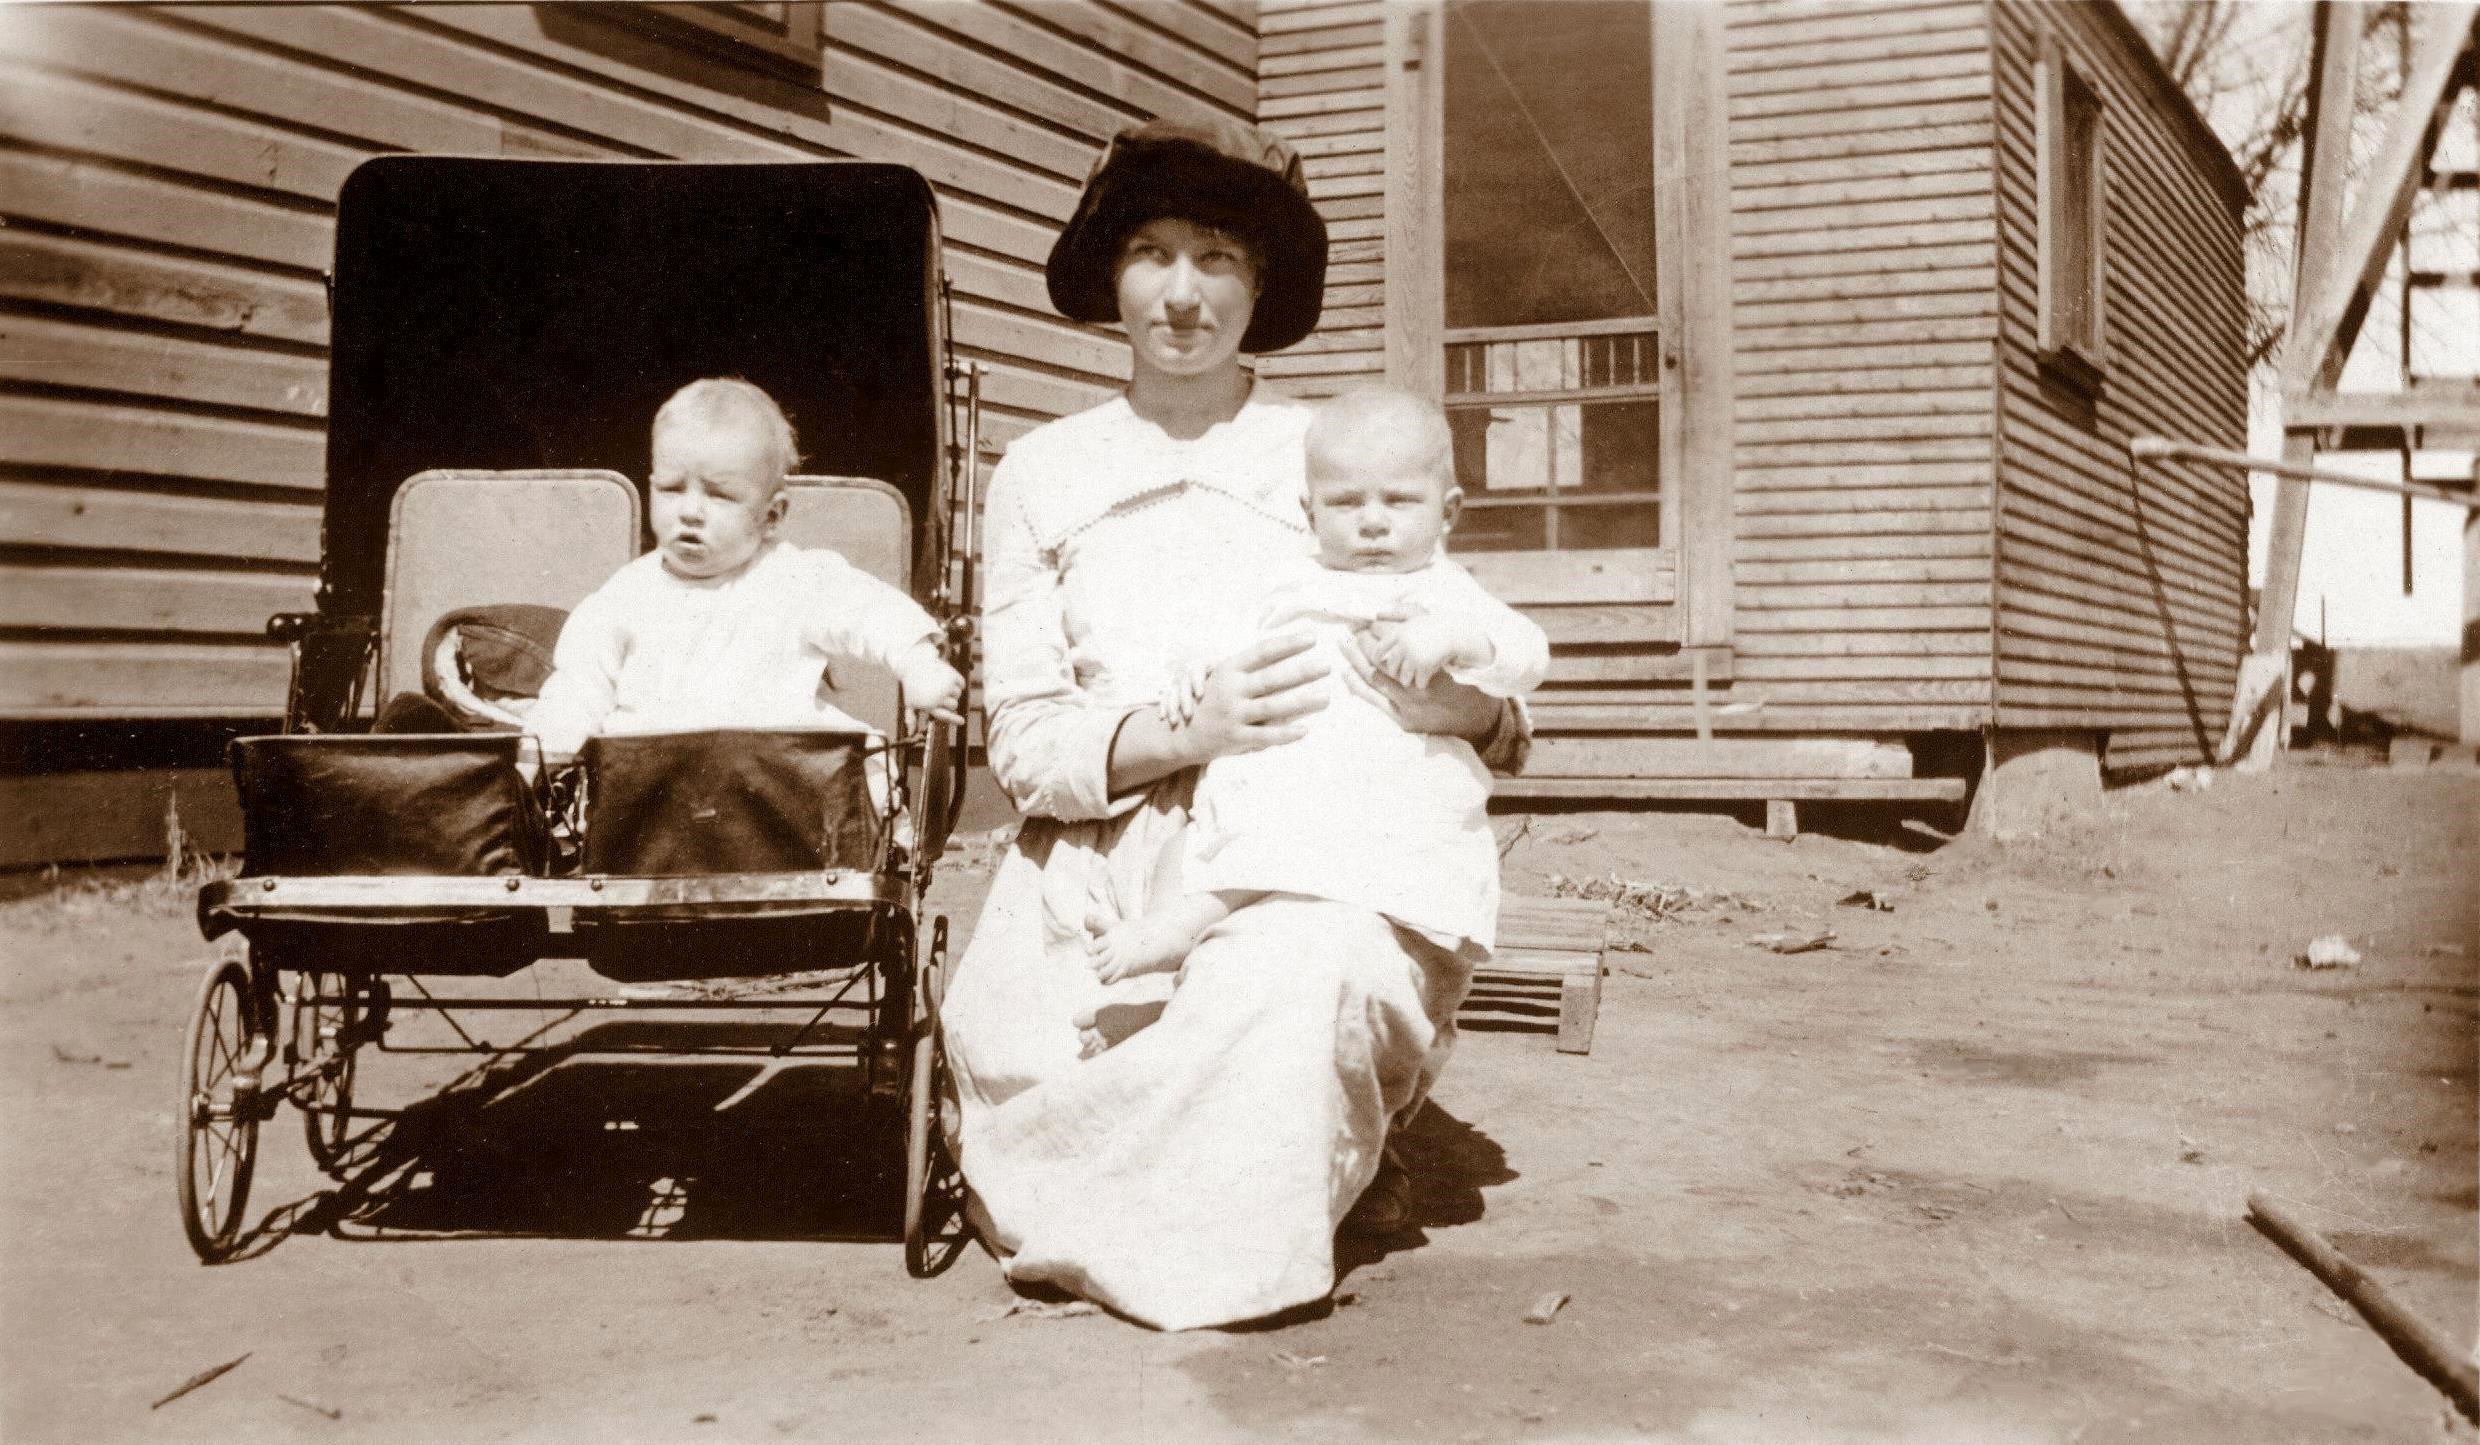 Gertrude and the twins Marco and Marion in Abernathy, 1920